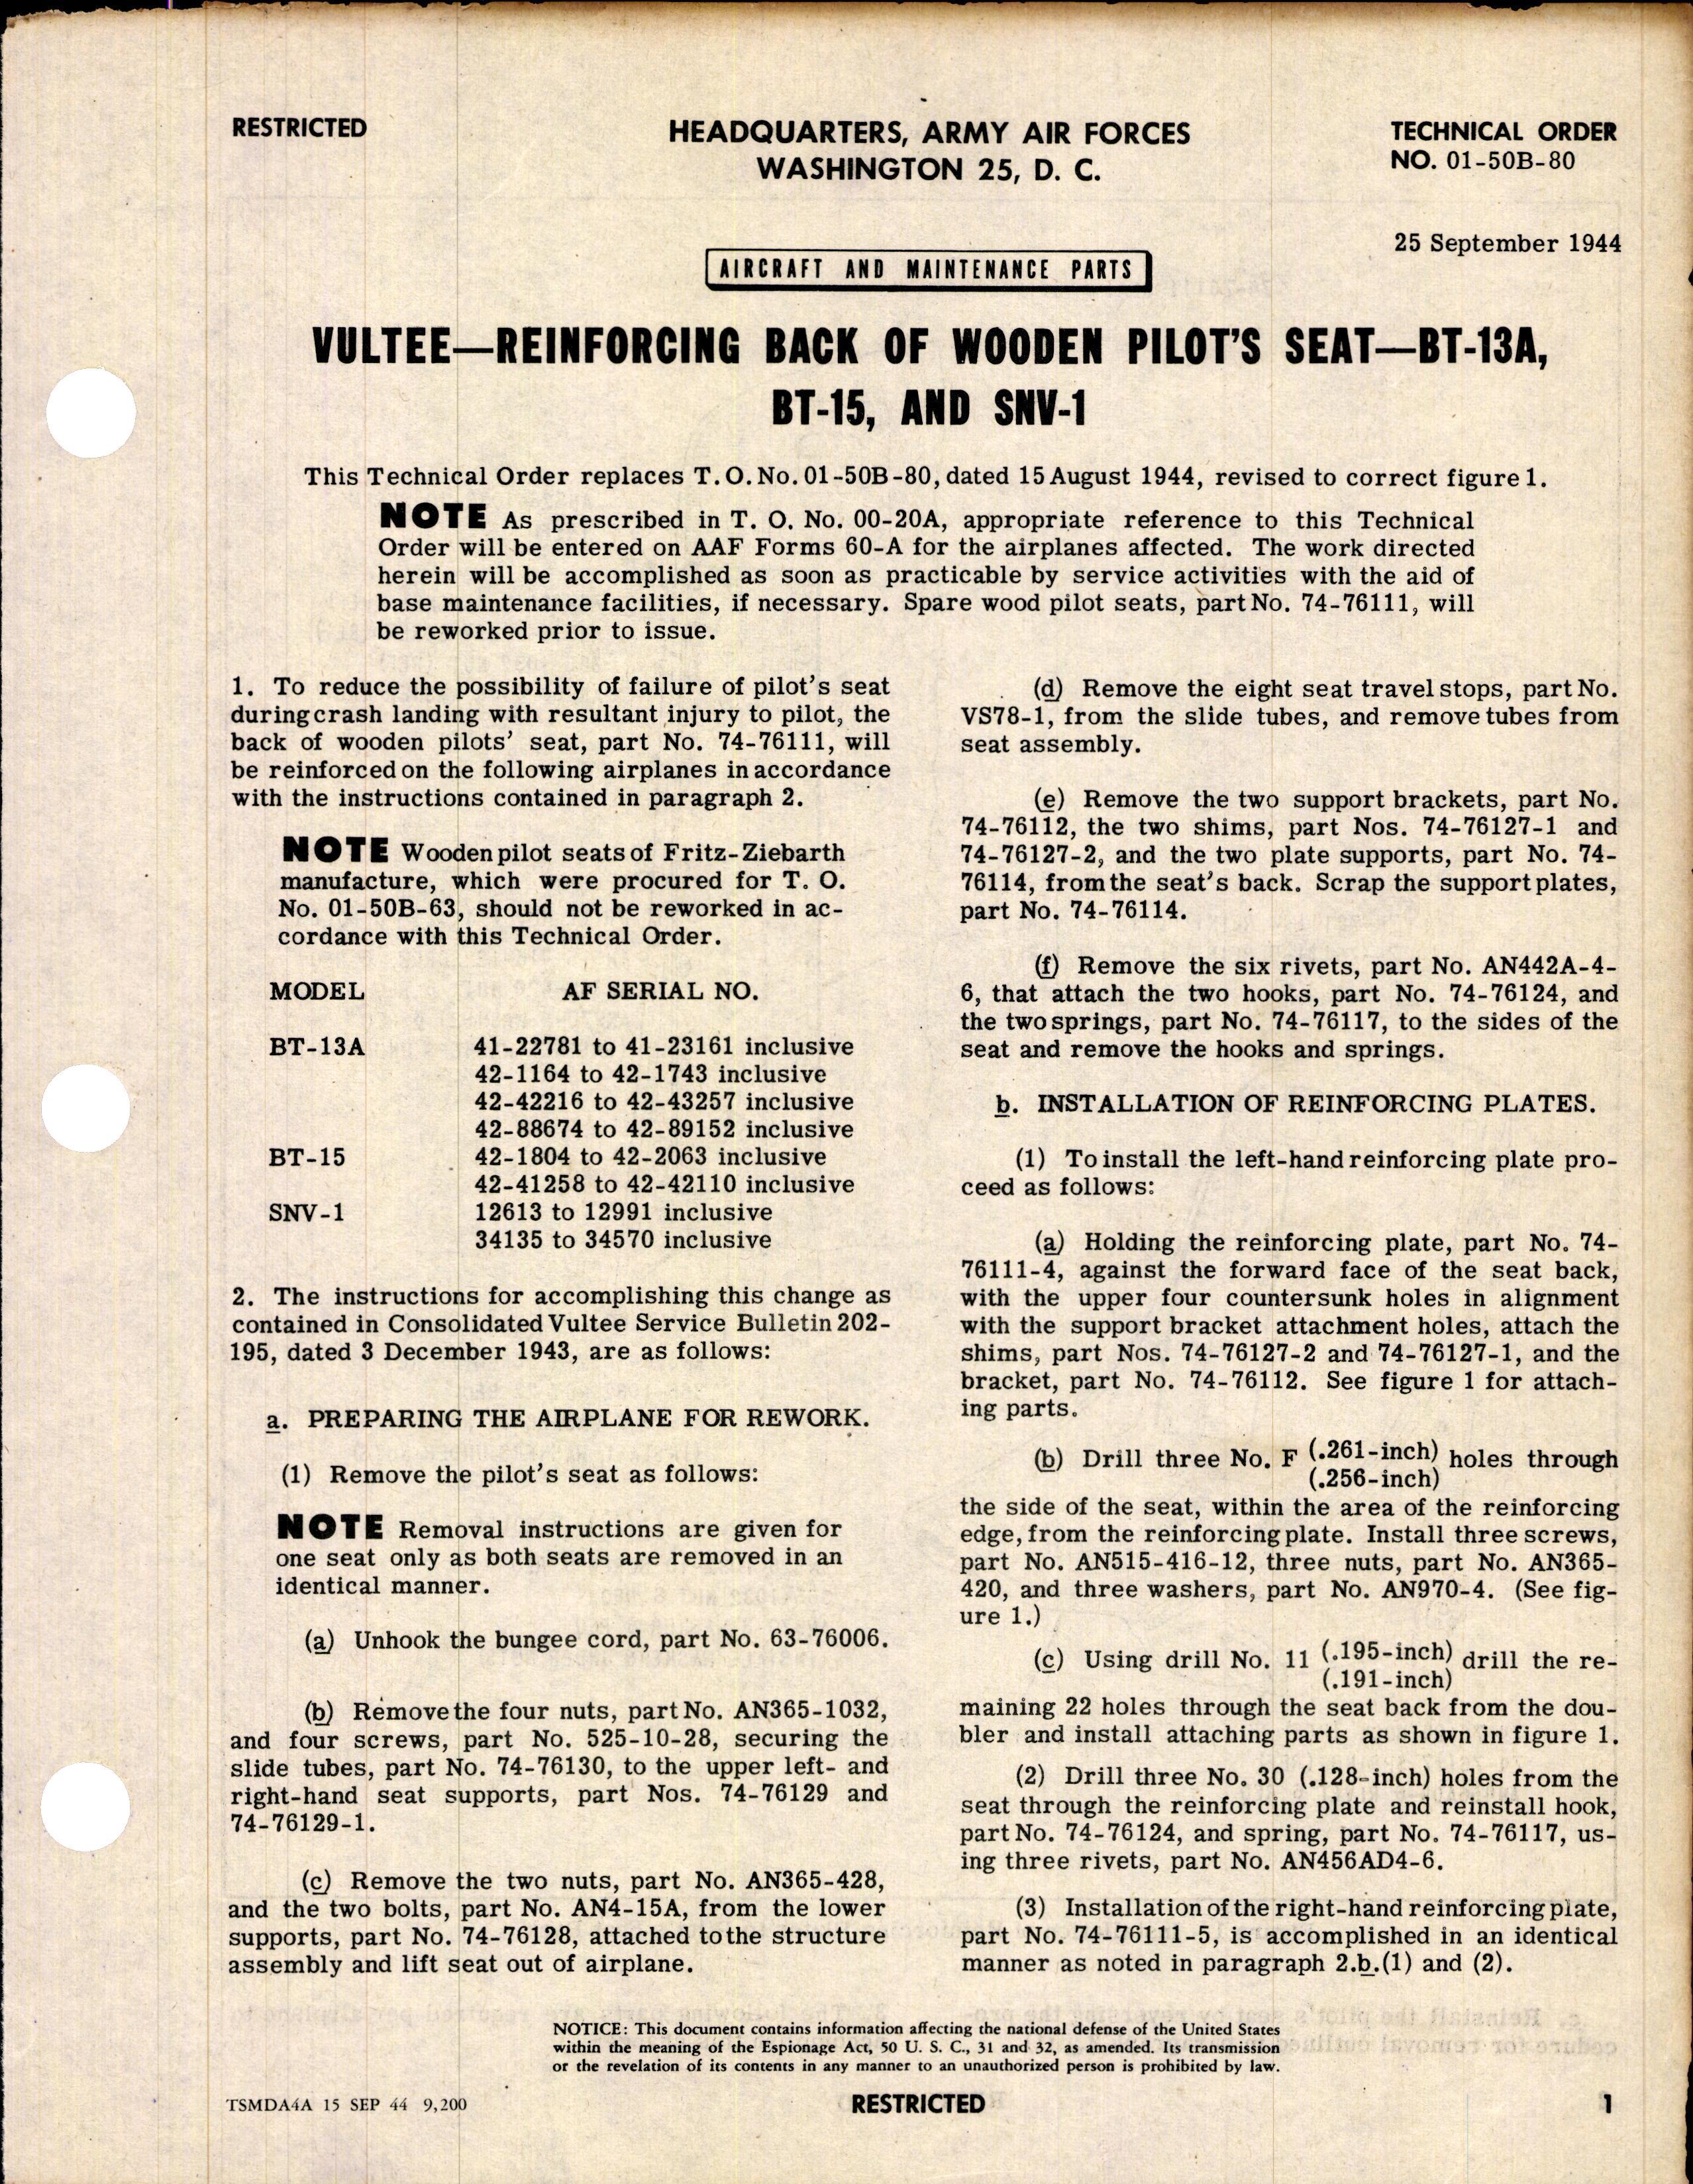 Sample page 1 from AirCorps Library document: Reinforcing Back of Wooden Pilot's Seat - BT-13A, BT-15, and SNV-1